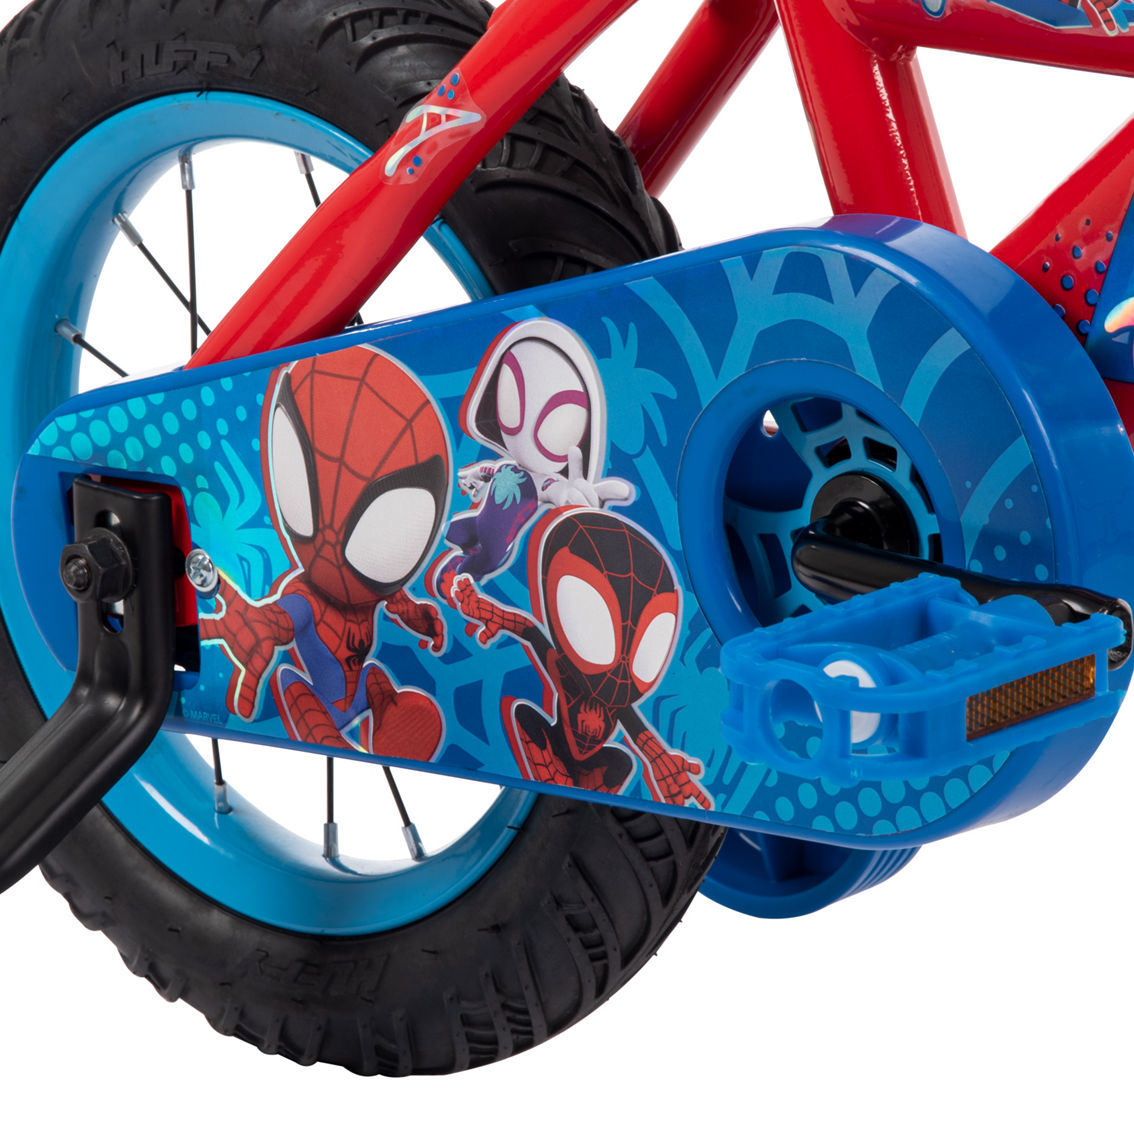 Huffy Boys 12 in. Spidey and His Amazing Friends Bike - Image 8 of 9